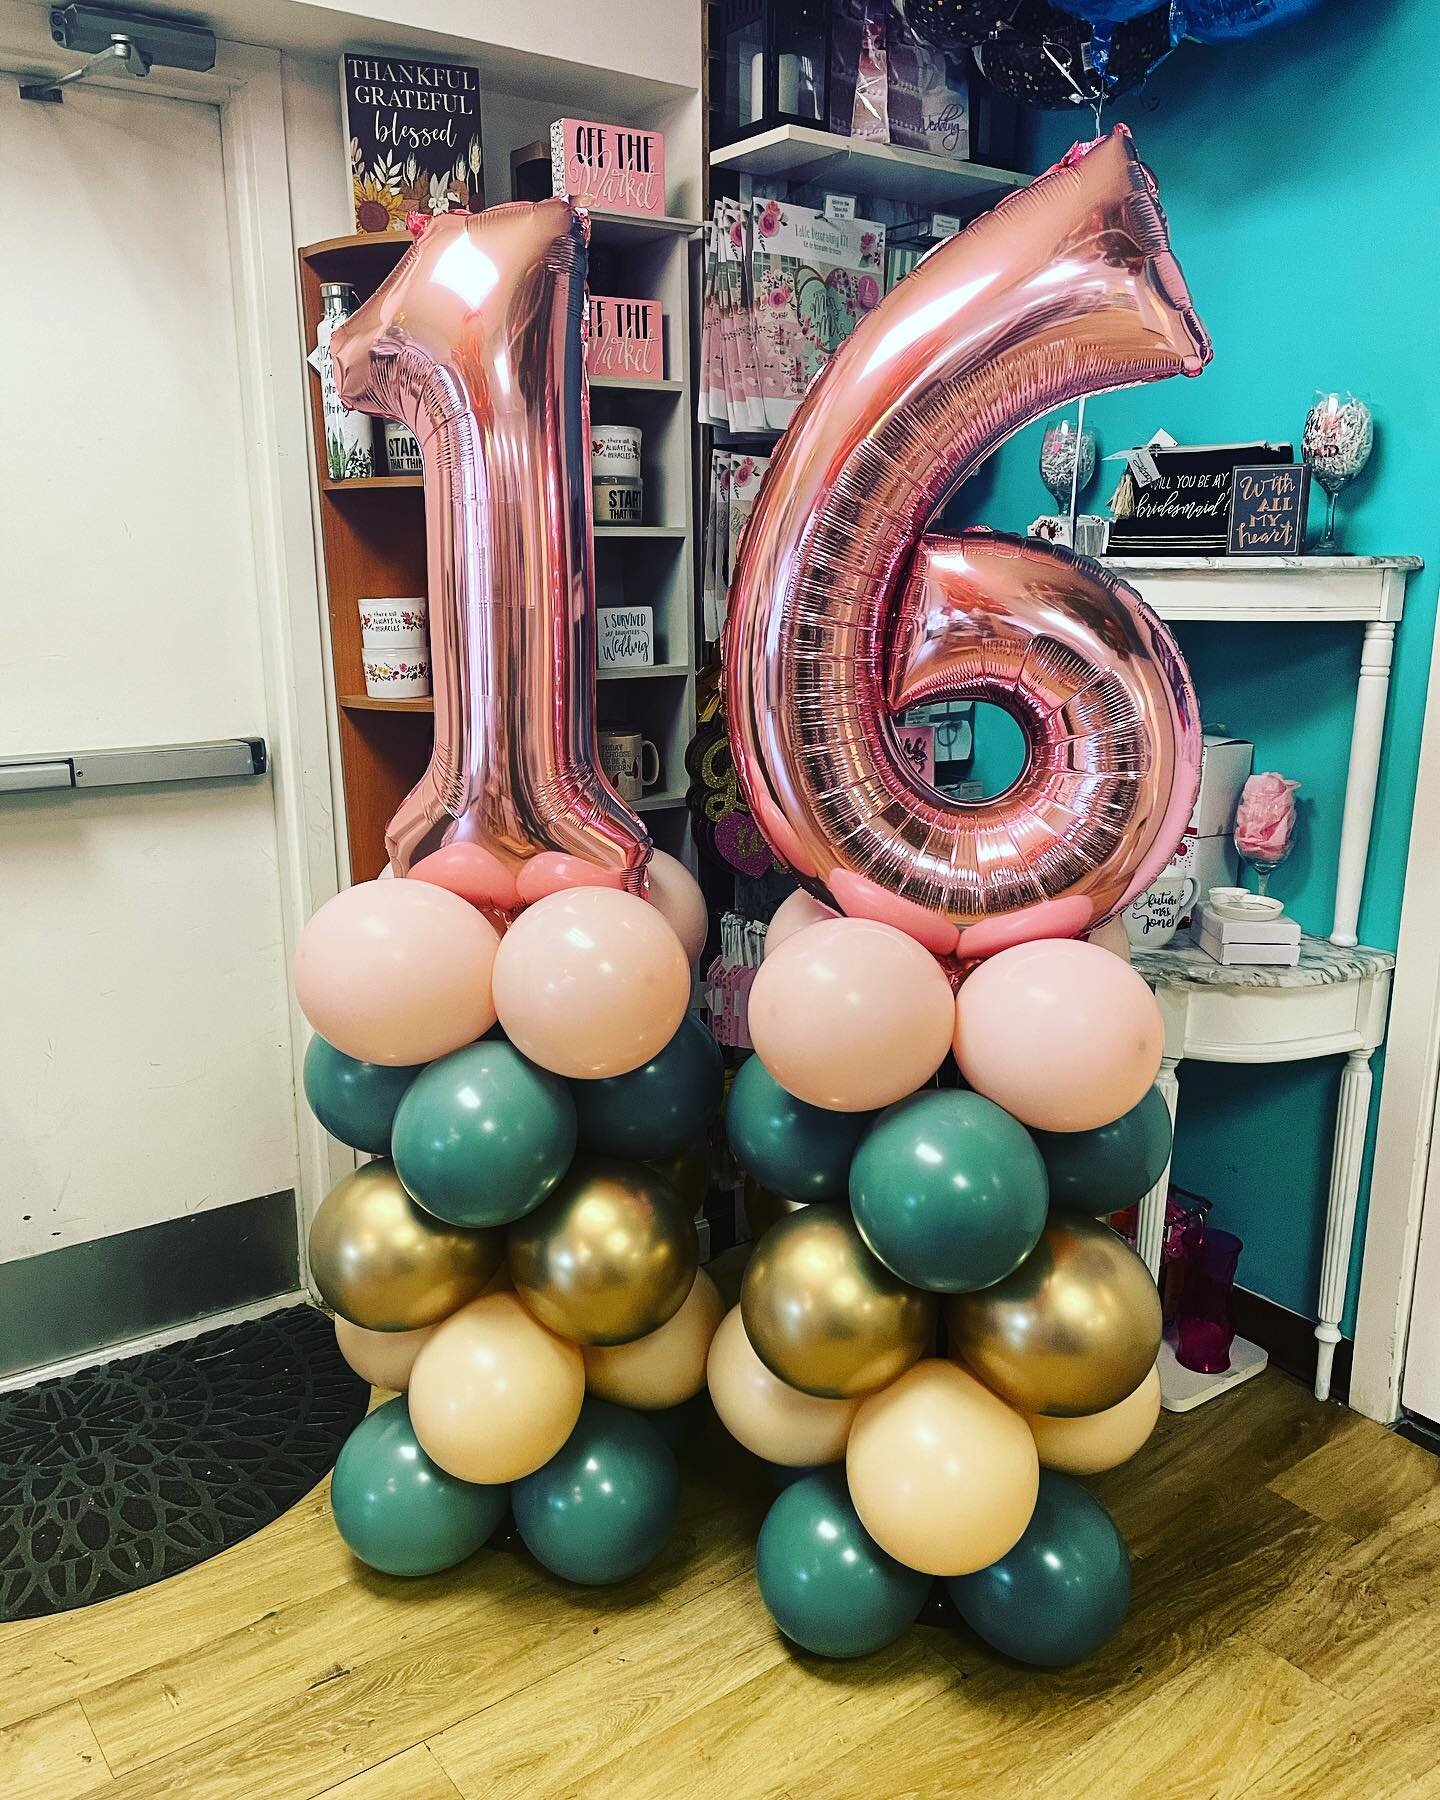 The perfect standalone piece for your next celebration. 🎉🩷 These number stacks bring color, fun, and  can be made with letters or other balloons for any occasion! 
.
.
.
#balloons #balloongarland #balloondecor #balloondecoration #balloonartist #swe